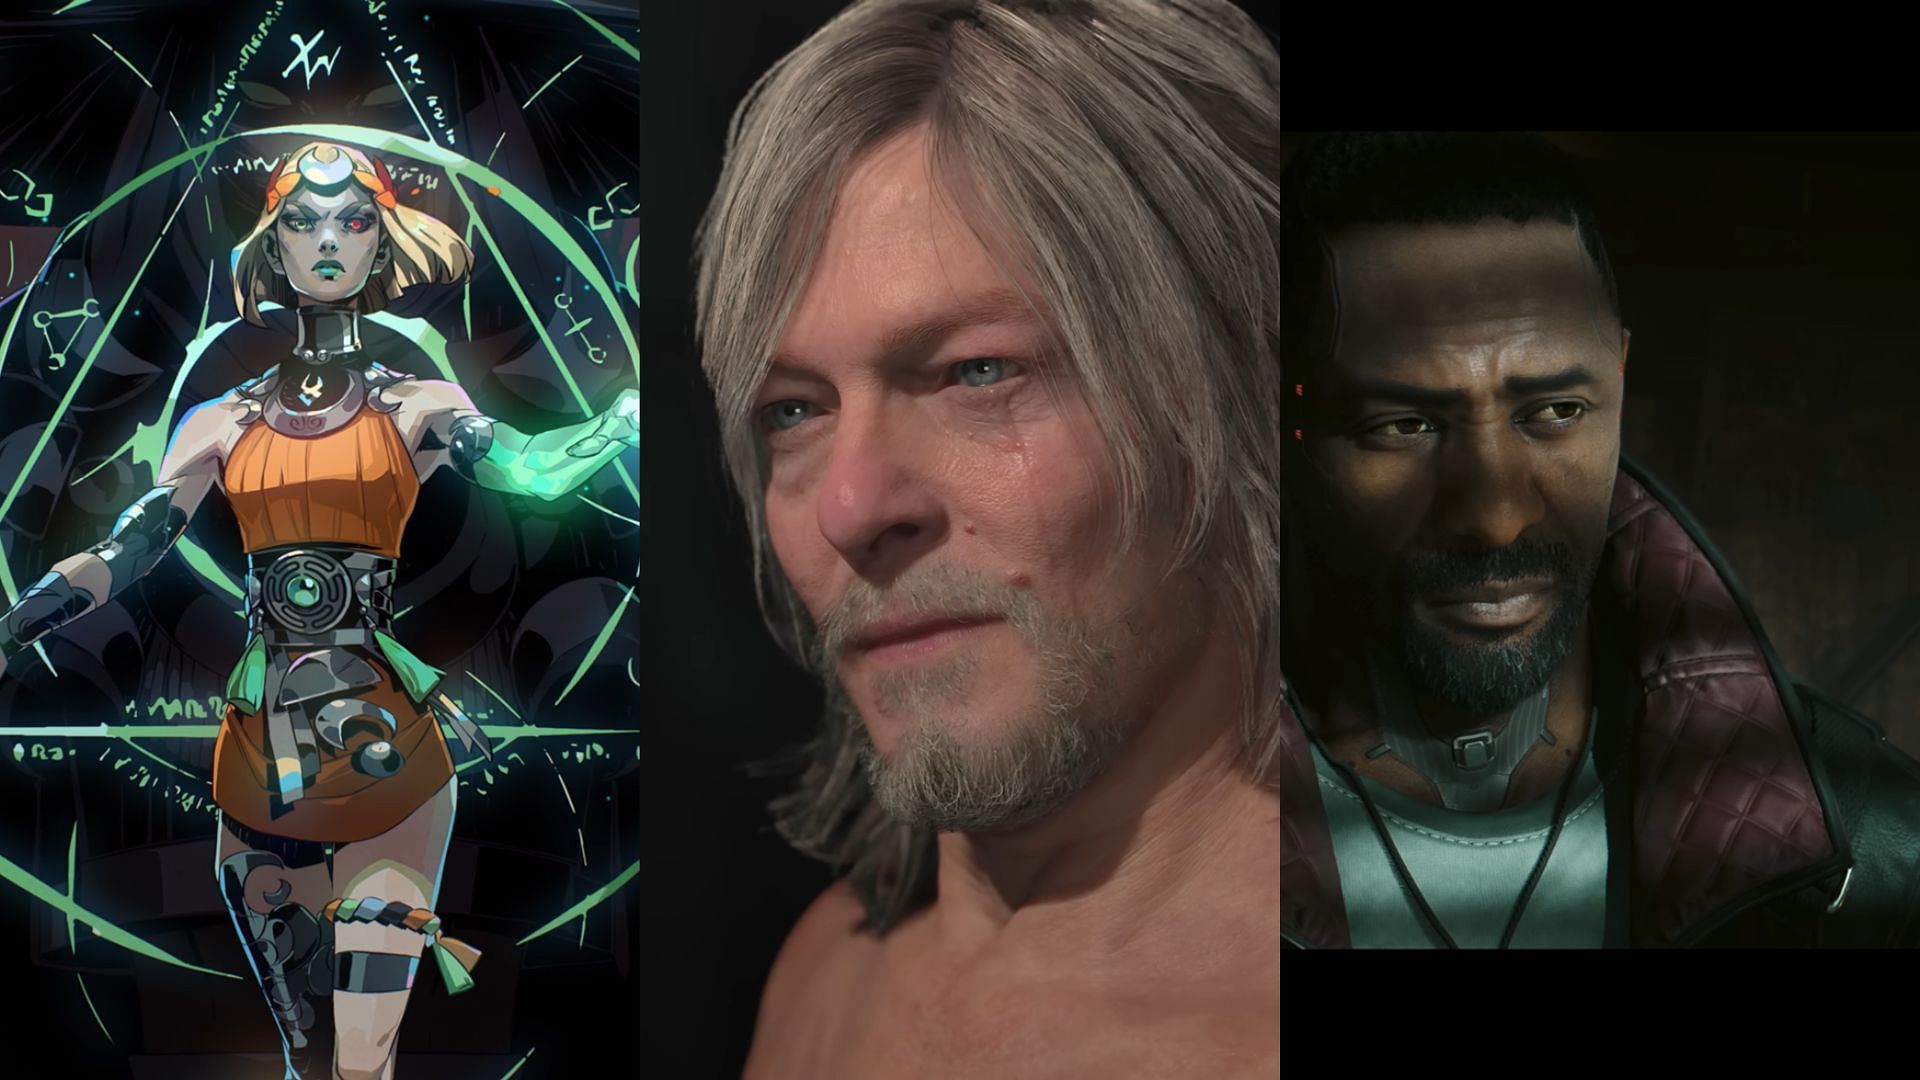 Hades 2 Officially Announced At Game Awards 2023 